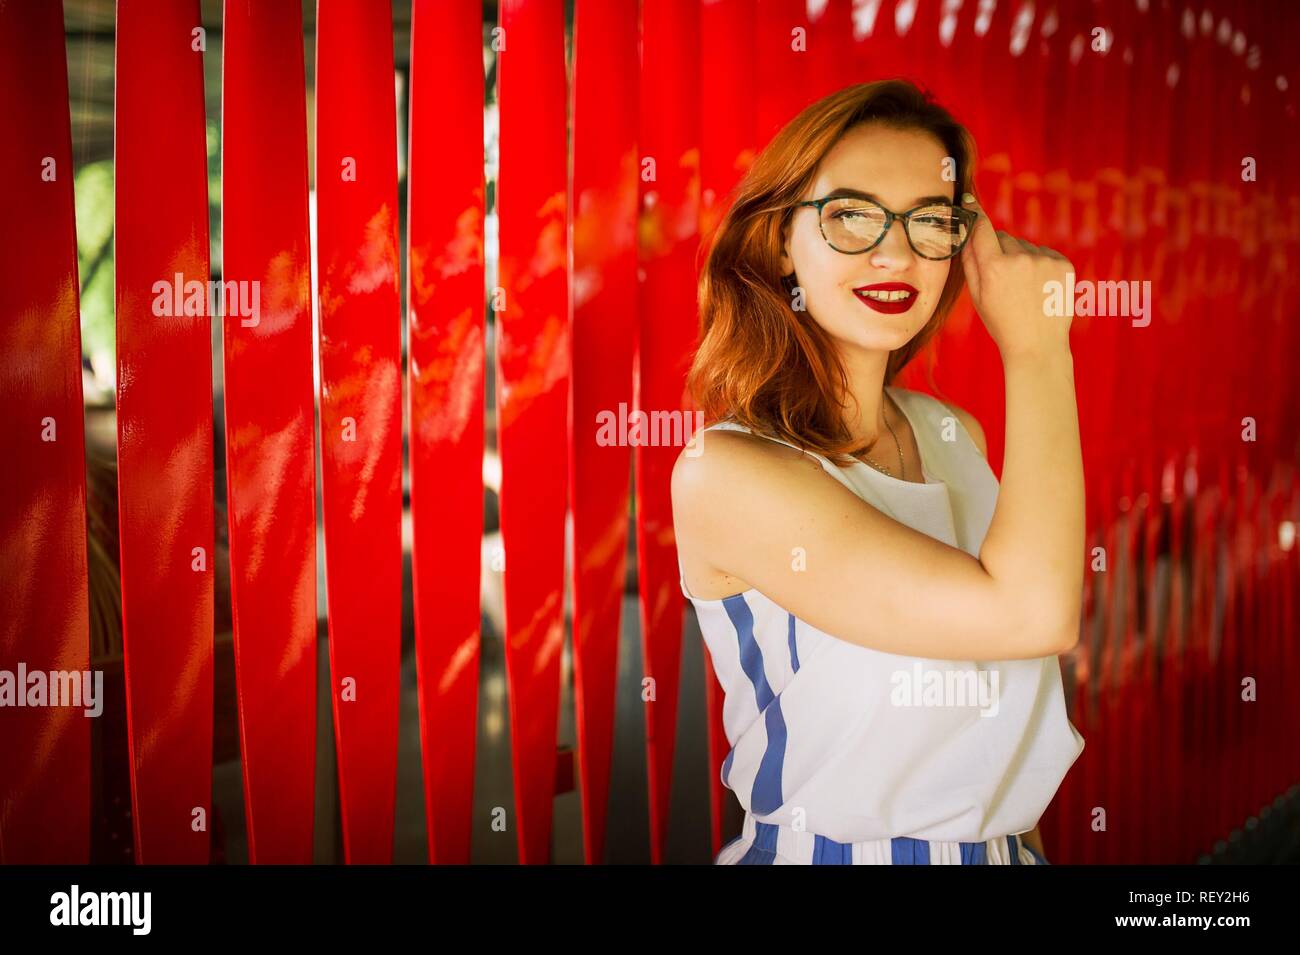 Attractive redhaired woman in eyeglasses posing against red background. Stock Photo